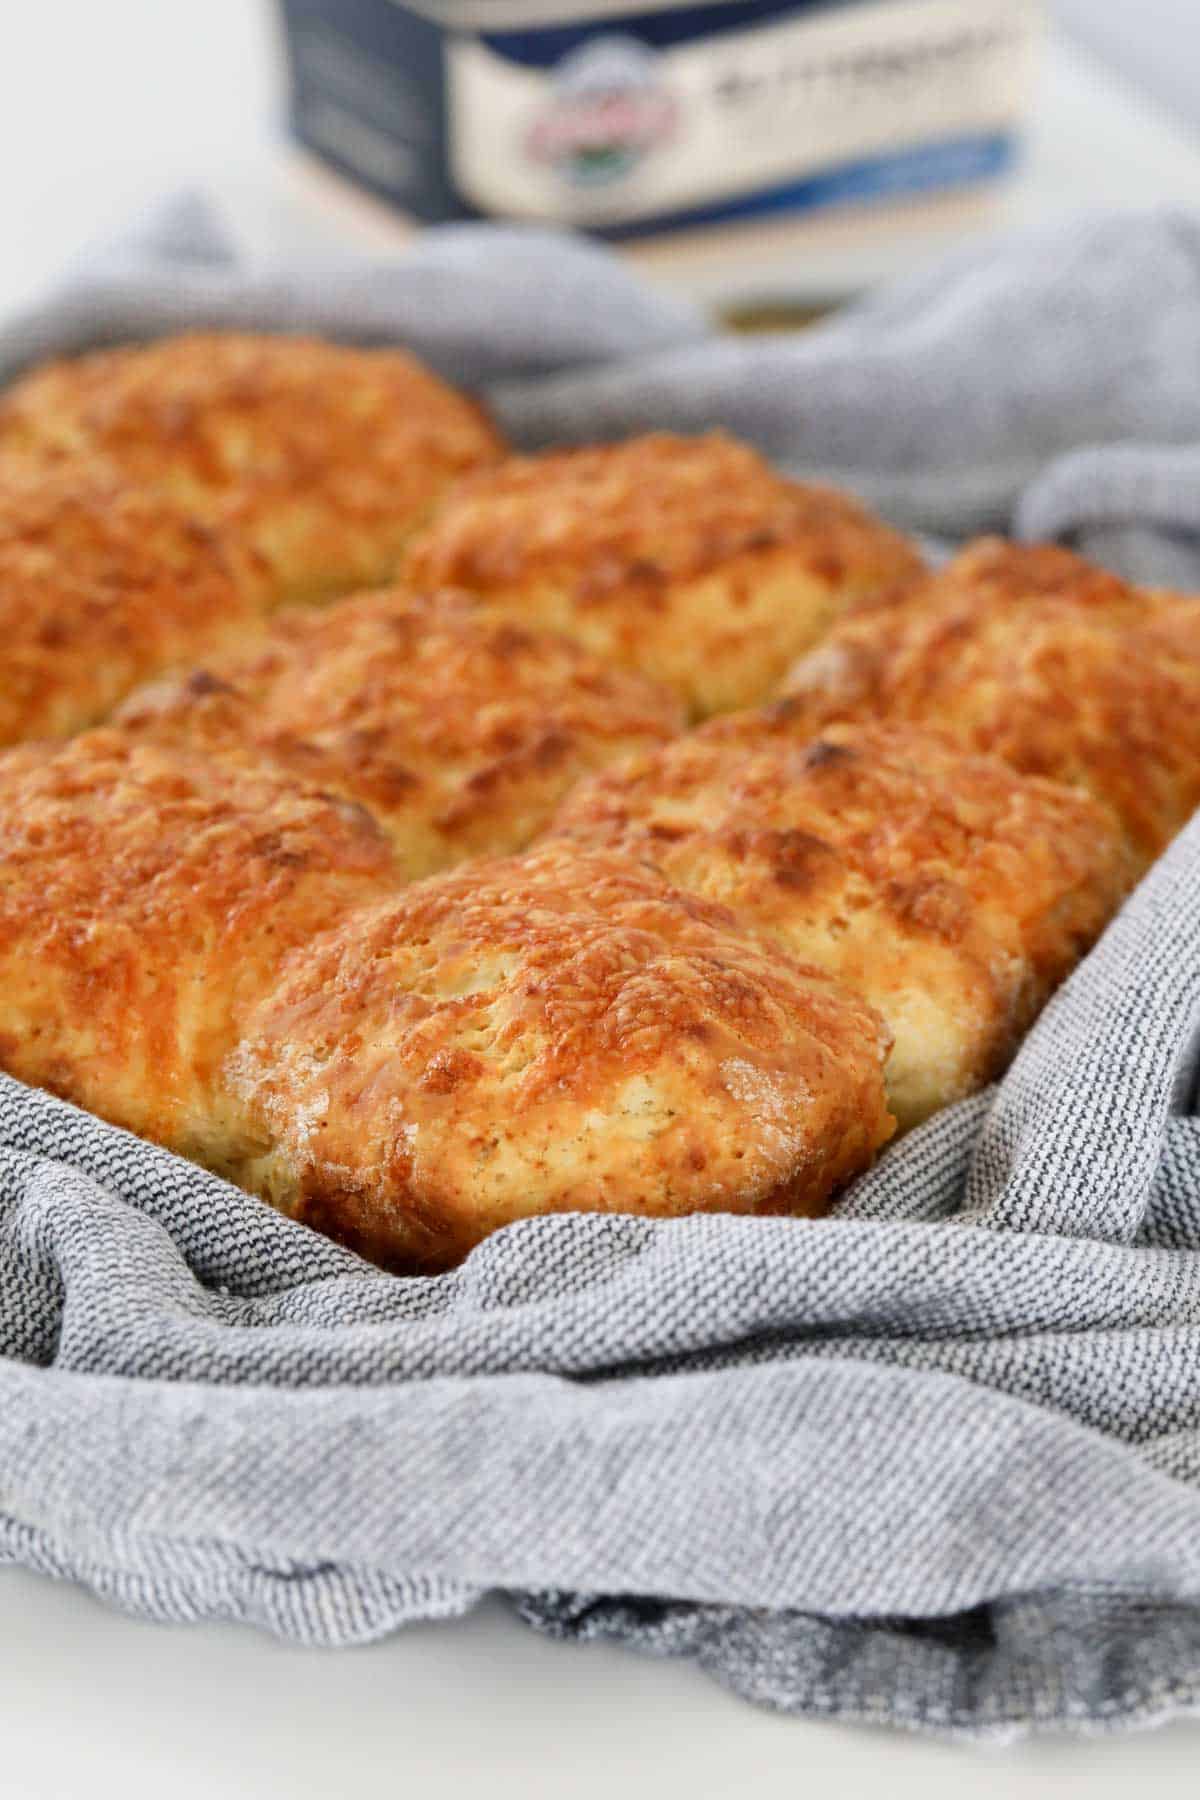 A batch of freshly baked cheese scones in a baking dish.